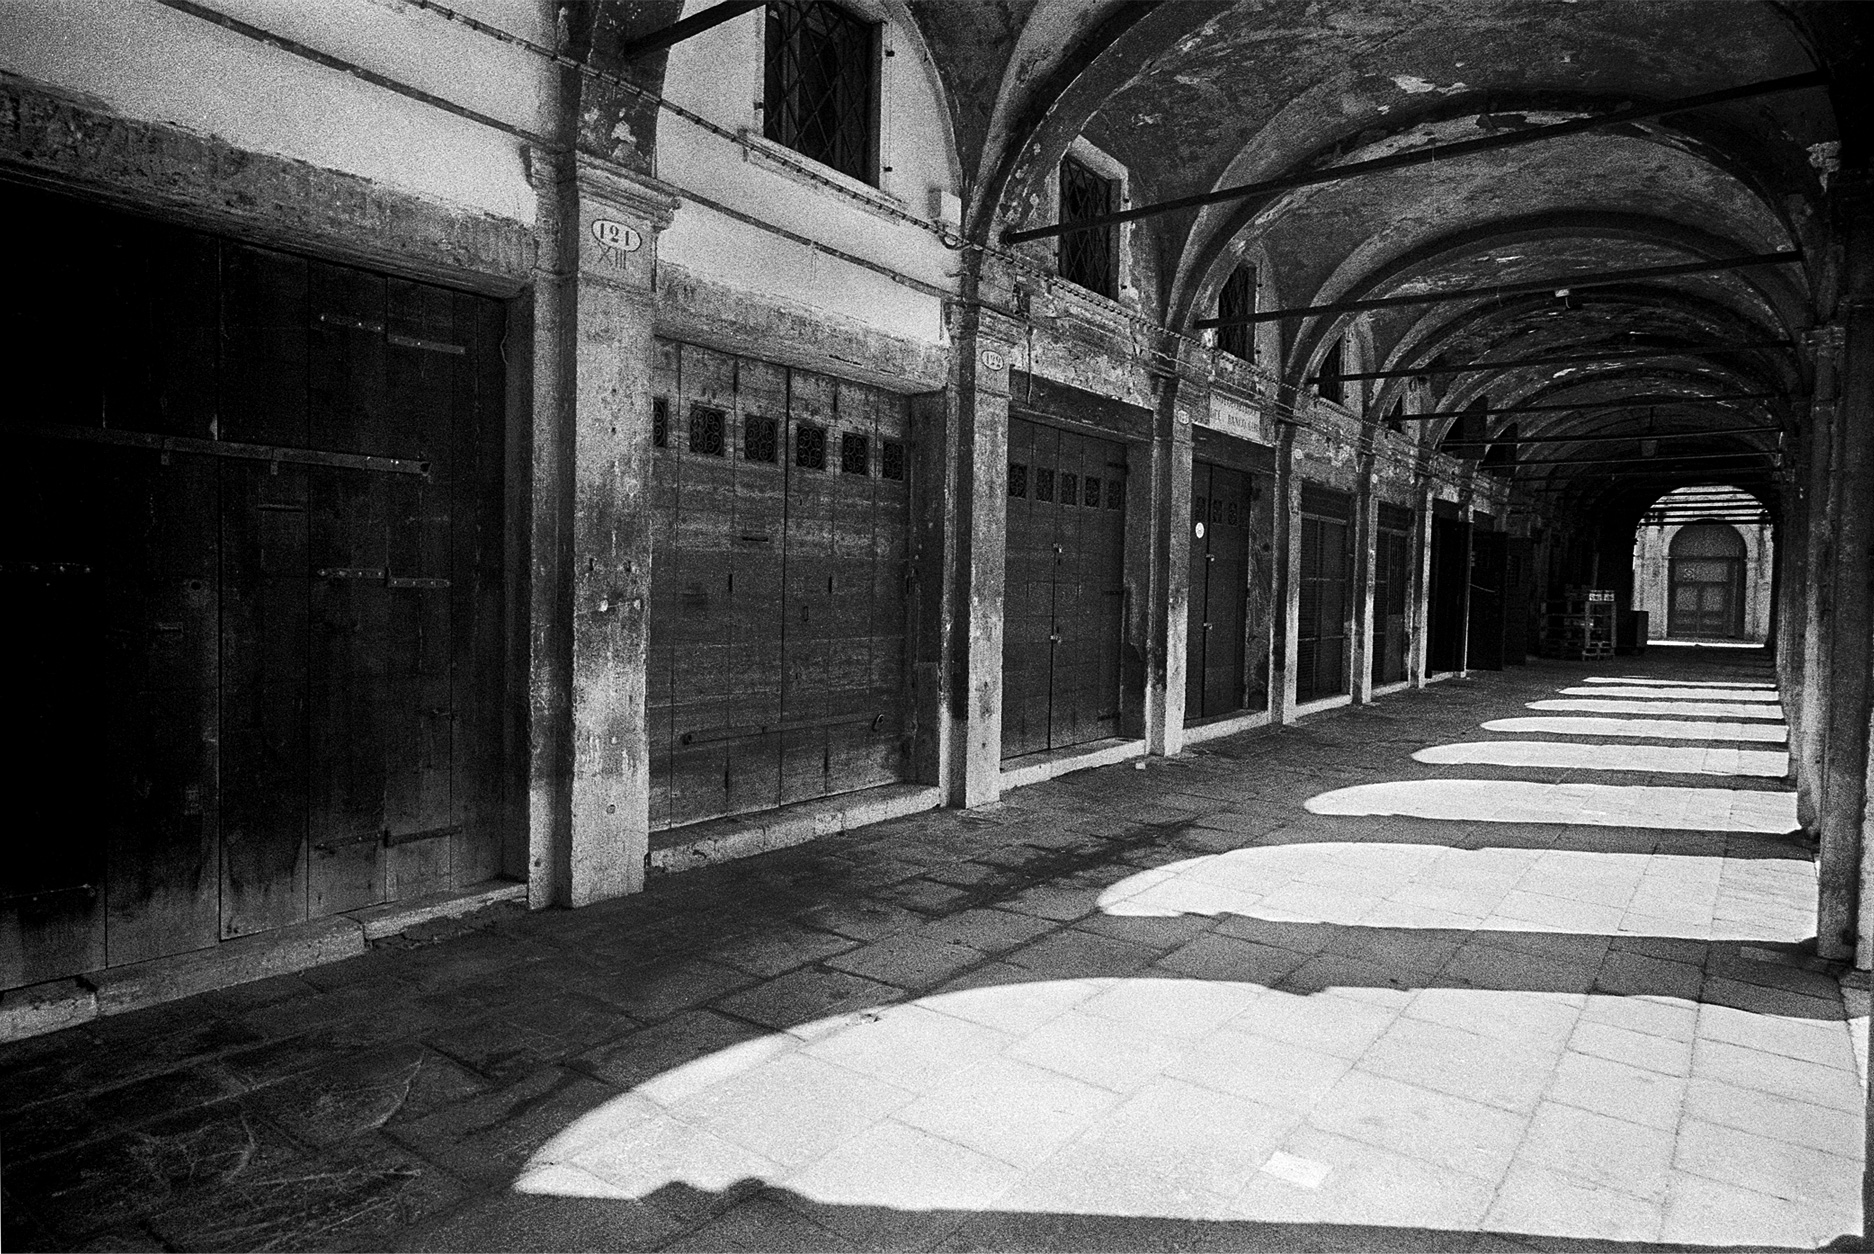 Image from the Streets of Venice